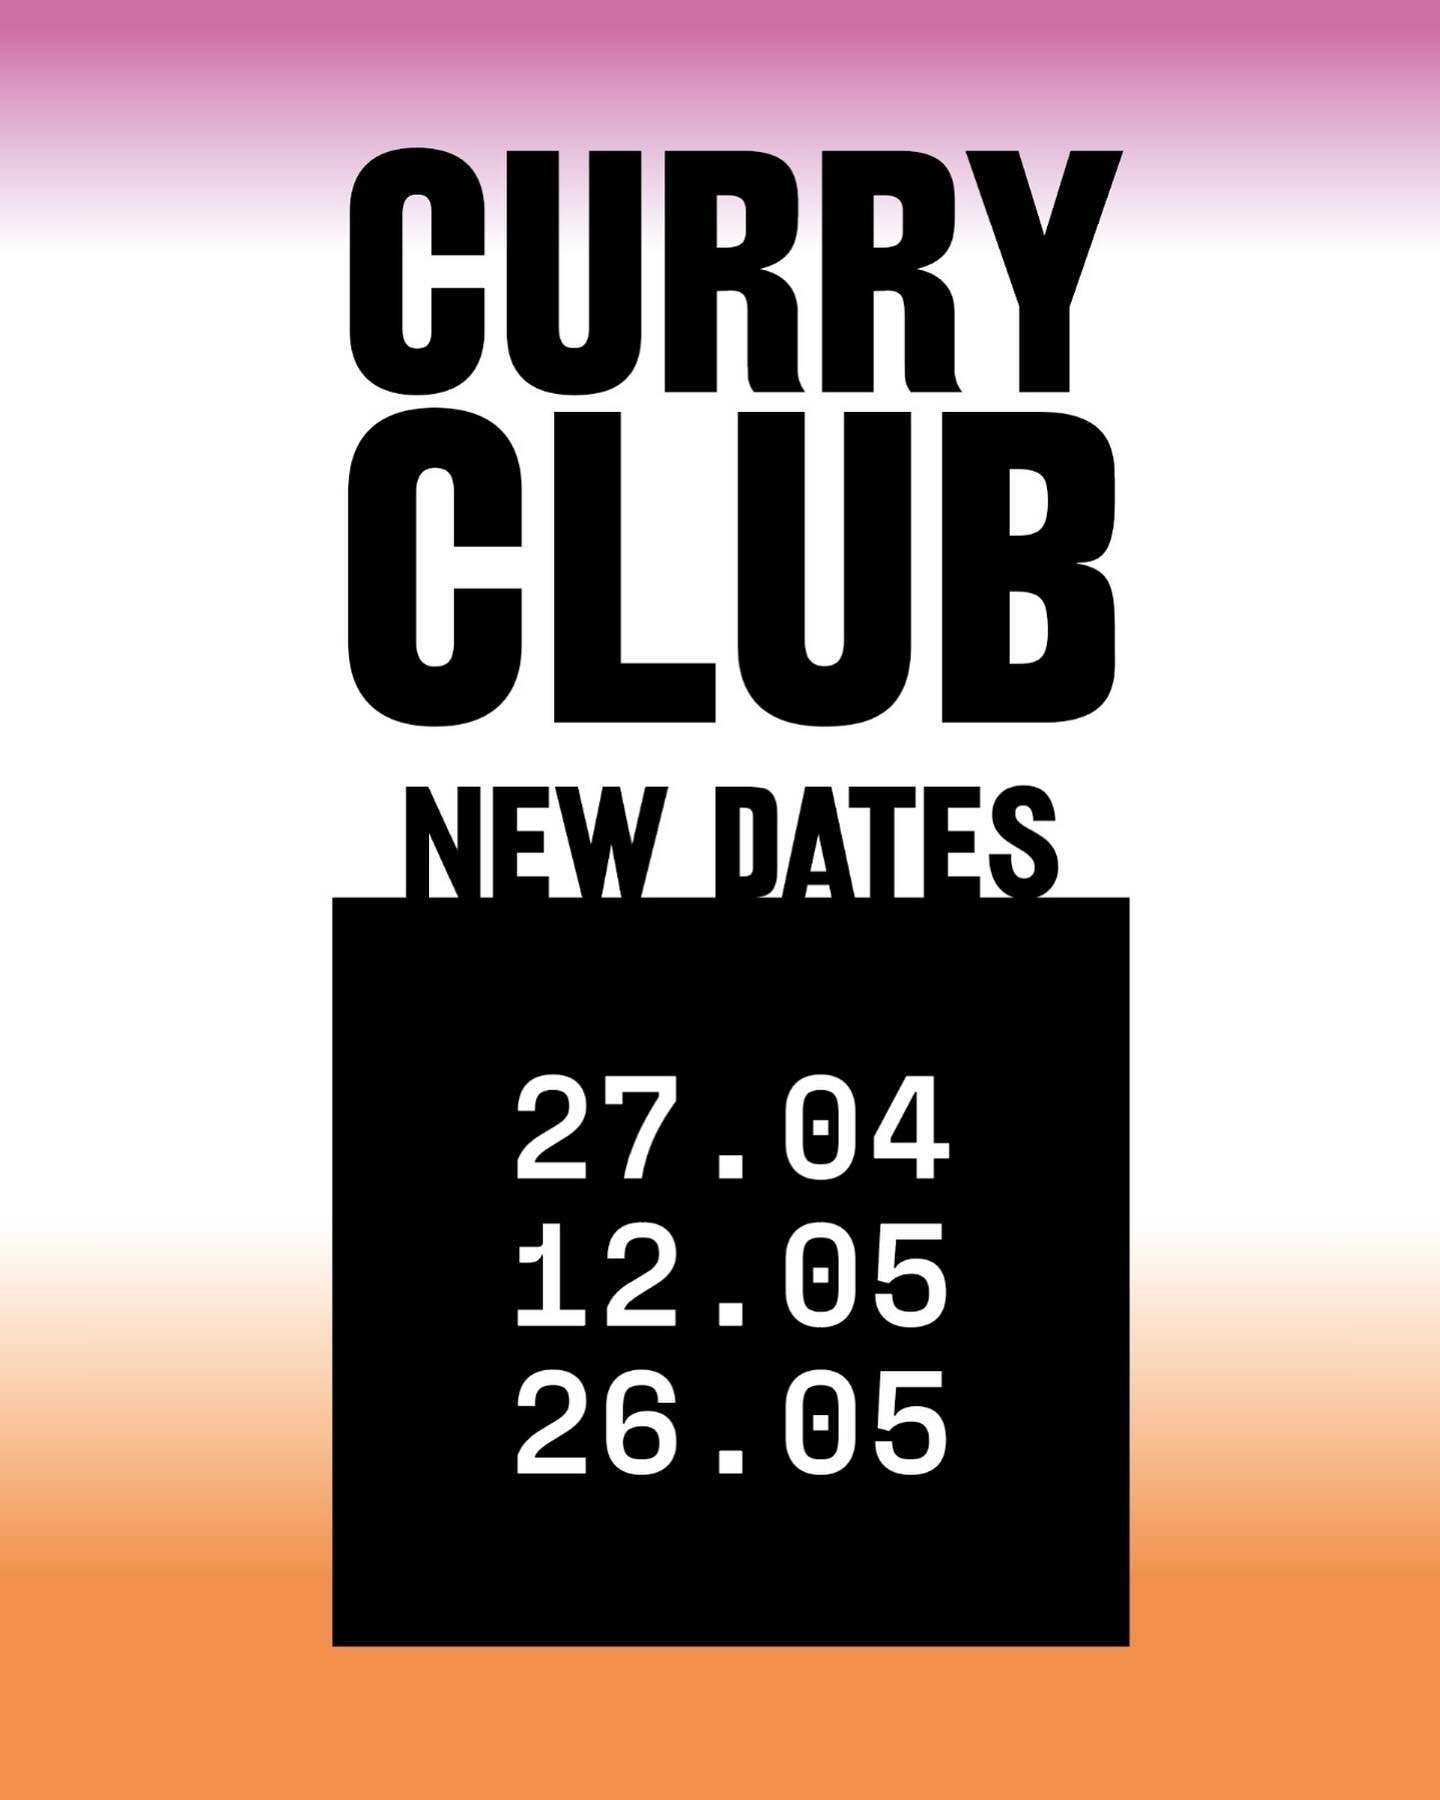 Some new dates for your diaries! Always at 1.15pm with our good friends @hackneychinese in E8 3PA. We&rsquo;re so excited to keep the lunches as a regular thing and want to keep growing and offering more inclusive eating experiences ❤️

We will have 